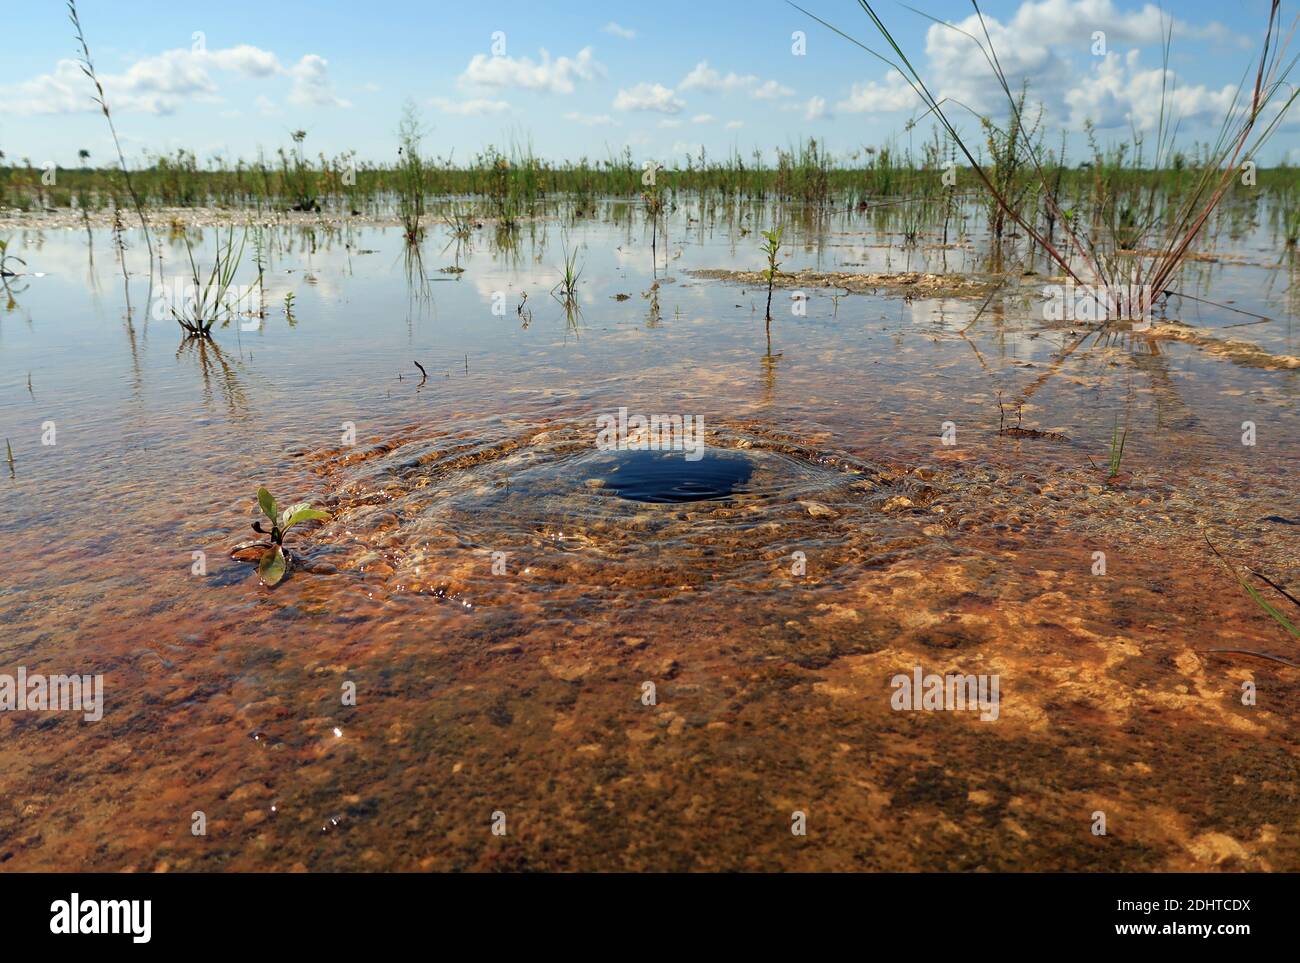 Small spring bringing water to surface in habitat restoration project in Everglades National Park, Florida. Stock Photo